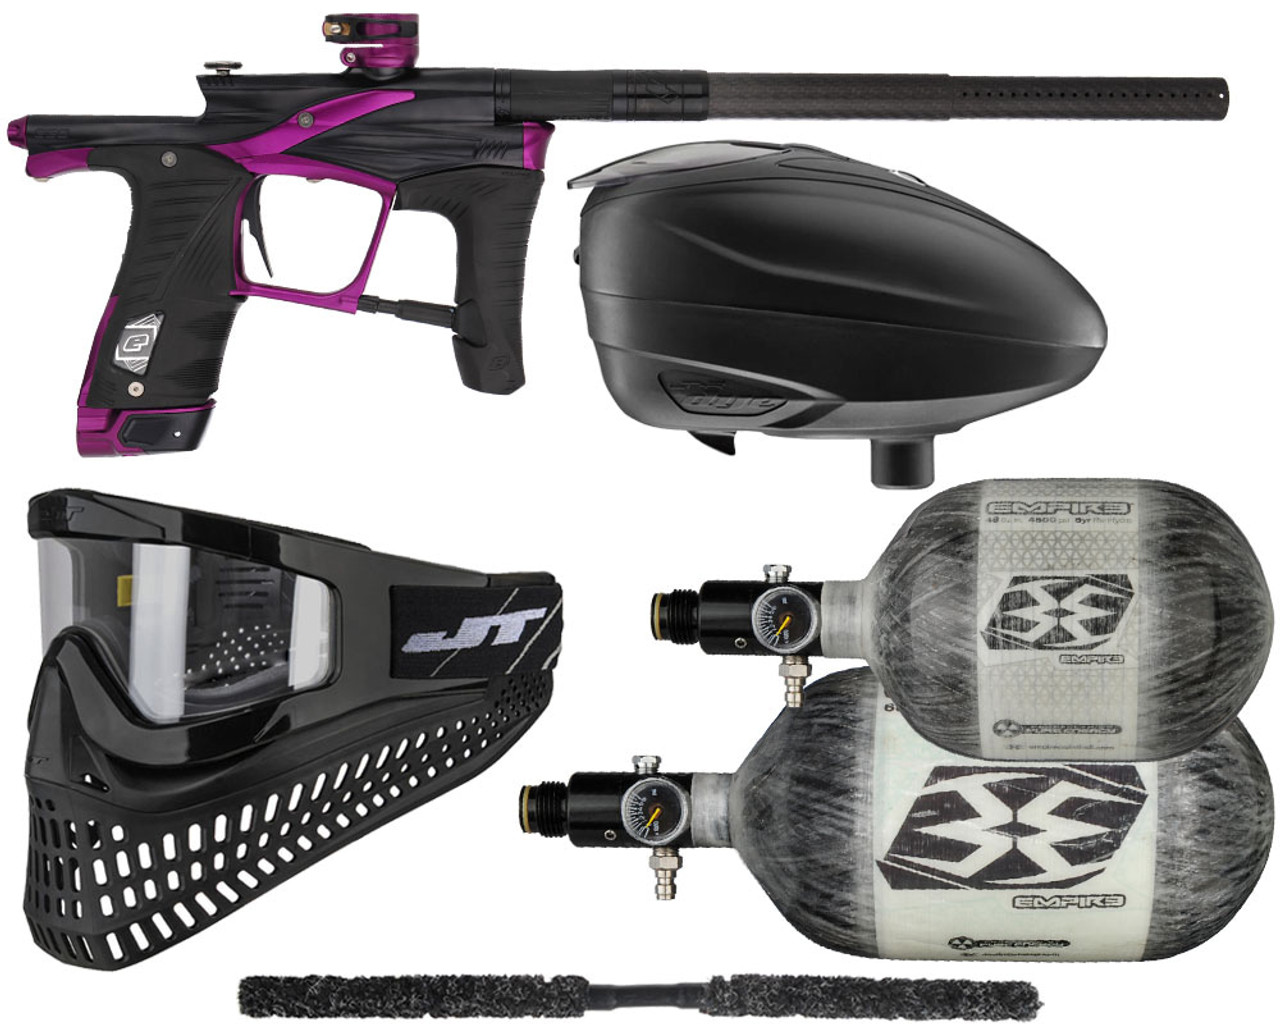 Planet Eclipse Ego LV1.6 Ultimate Paintball Gun Package Kit